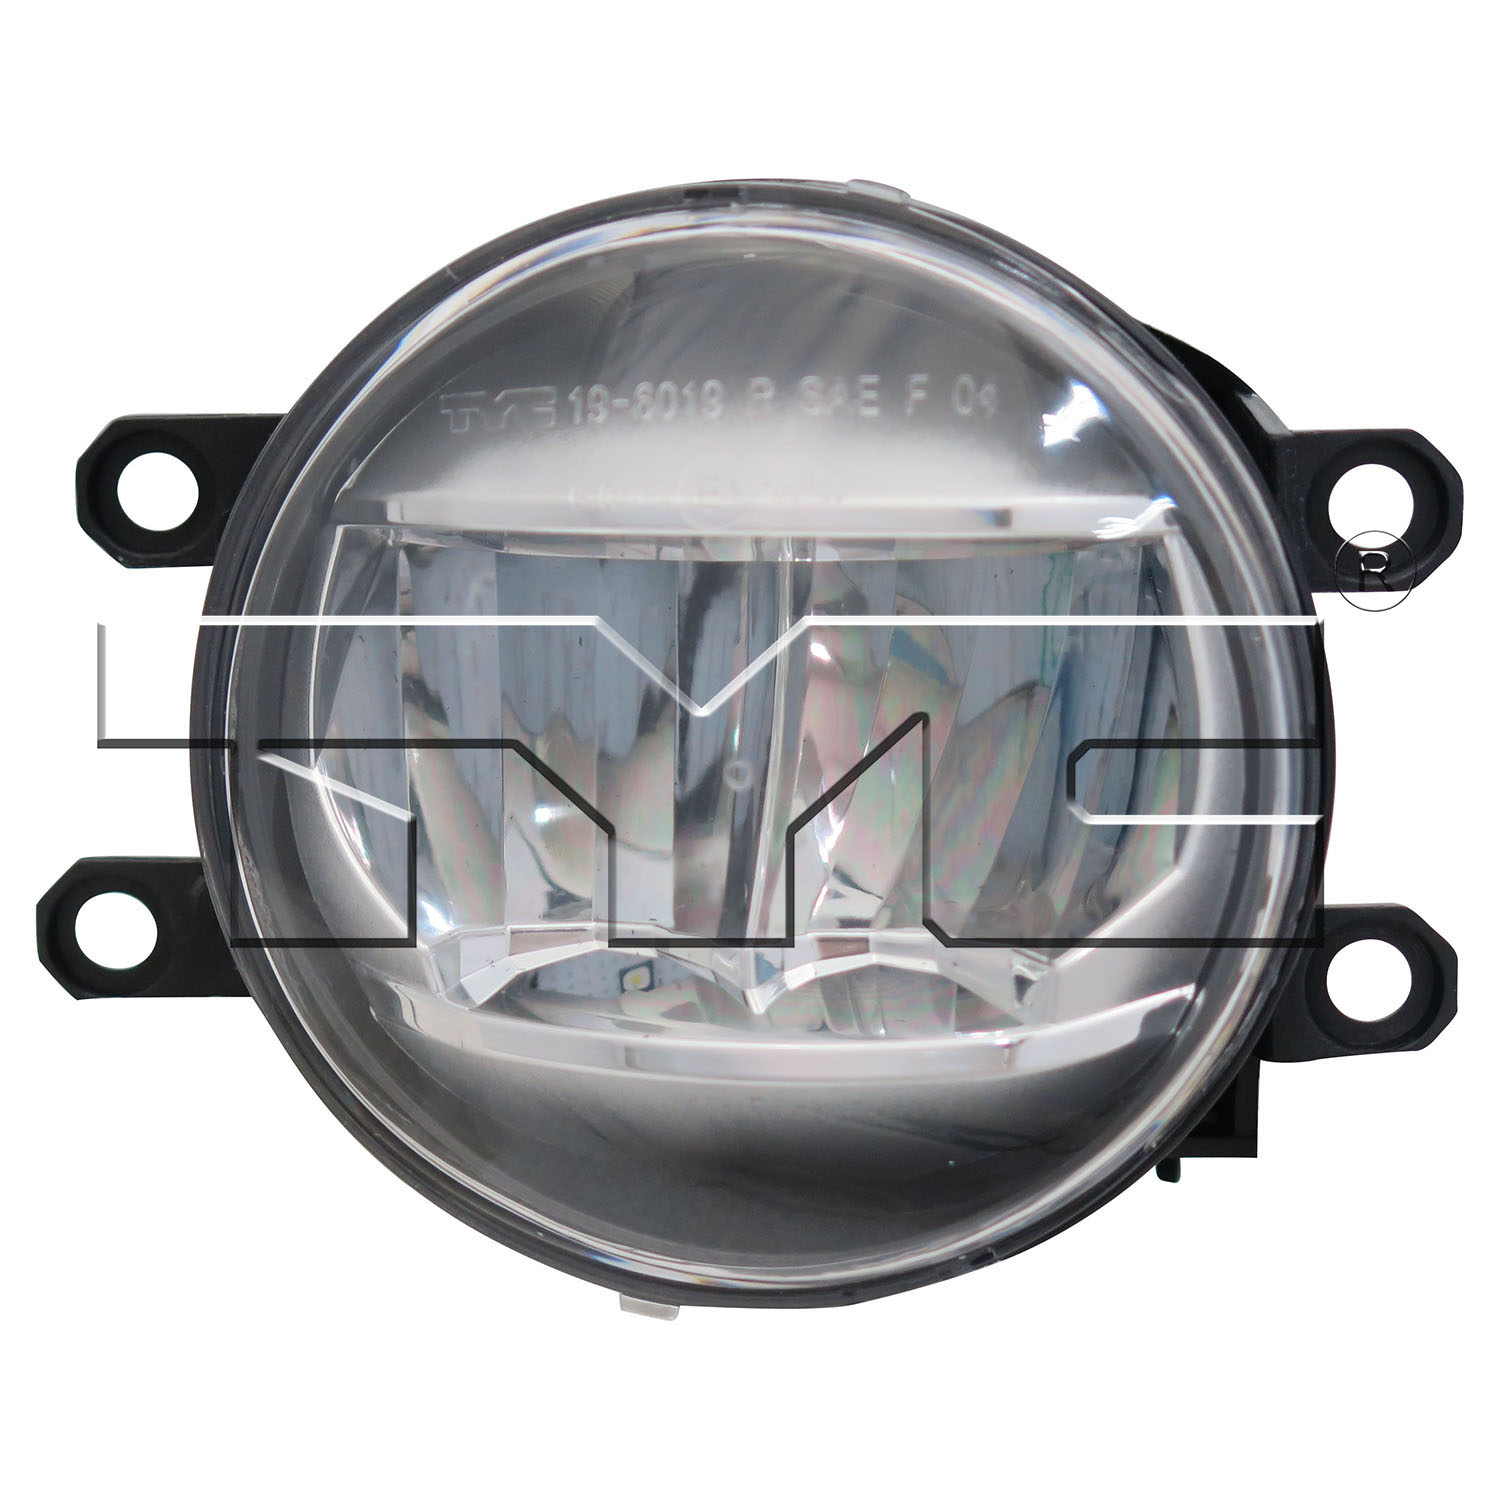 Aftermarket FOG LIGHTS for LEXUS - IS F, IS F,14-14,RT Fog lamp assy